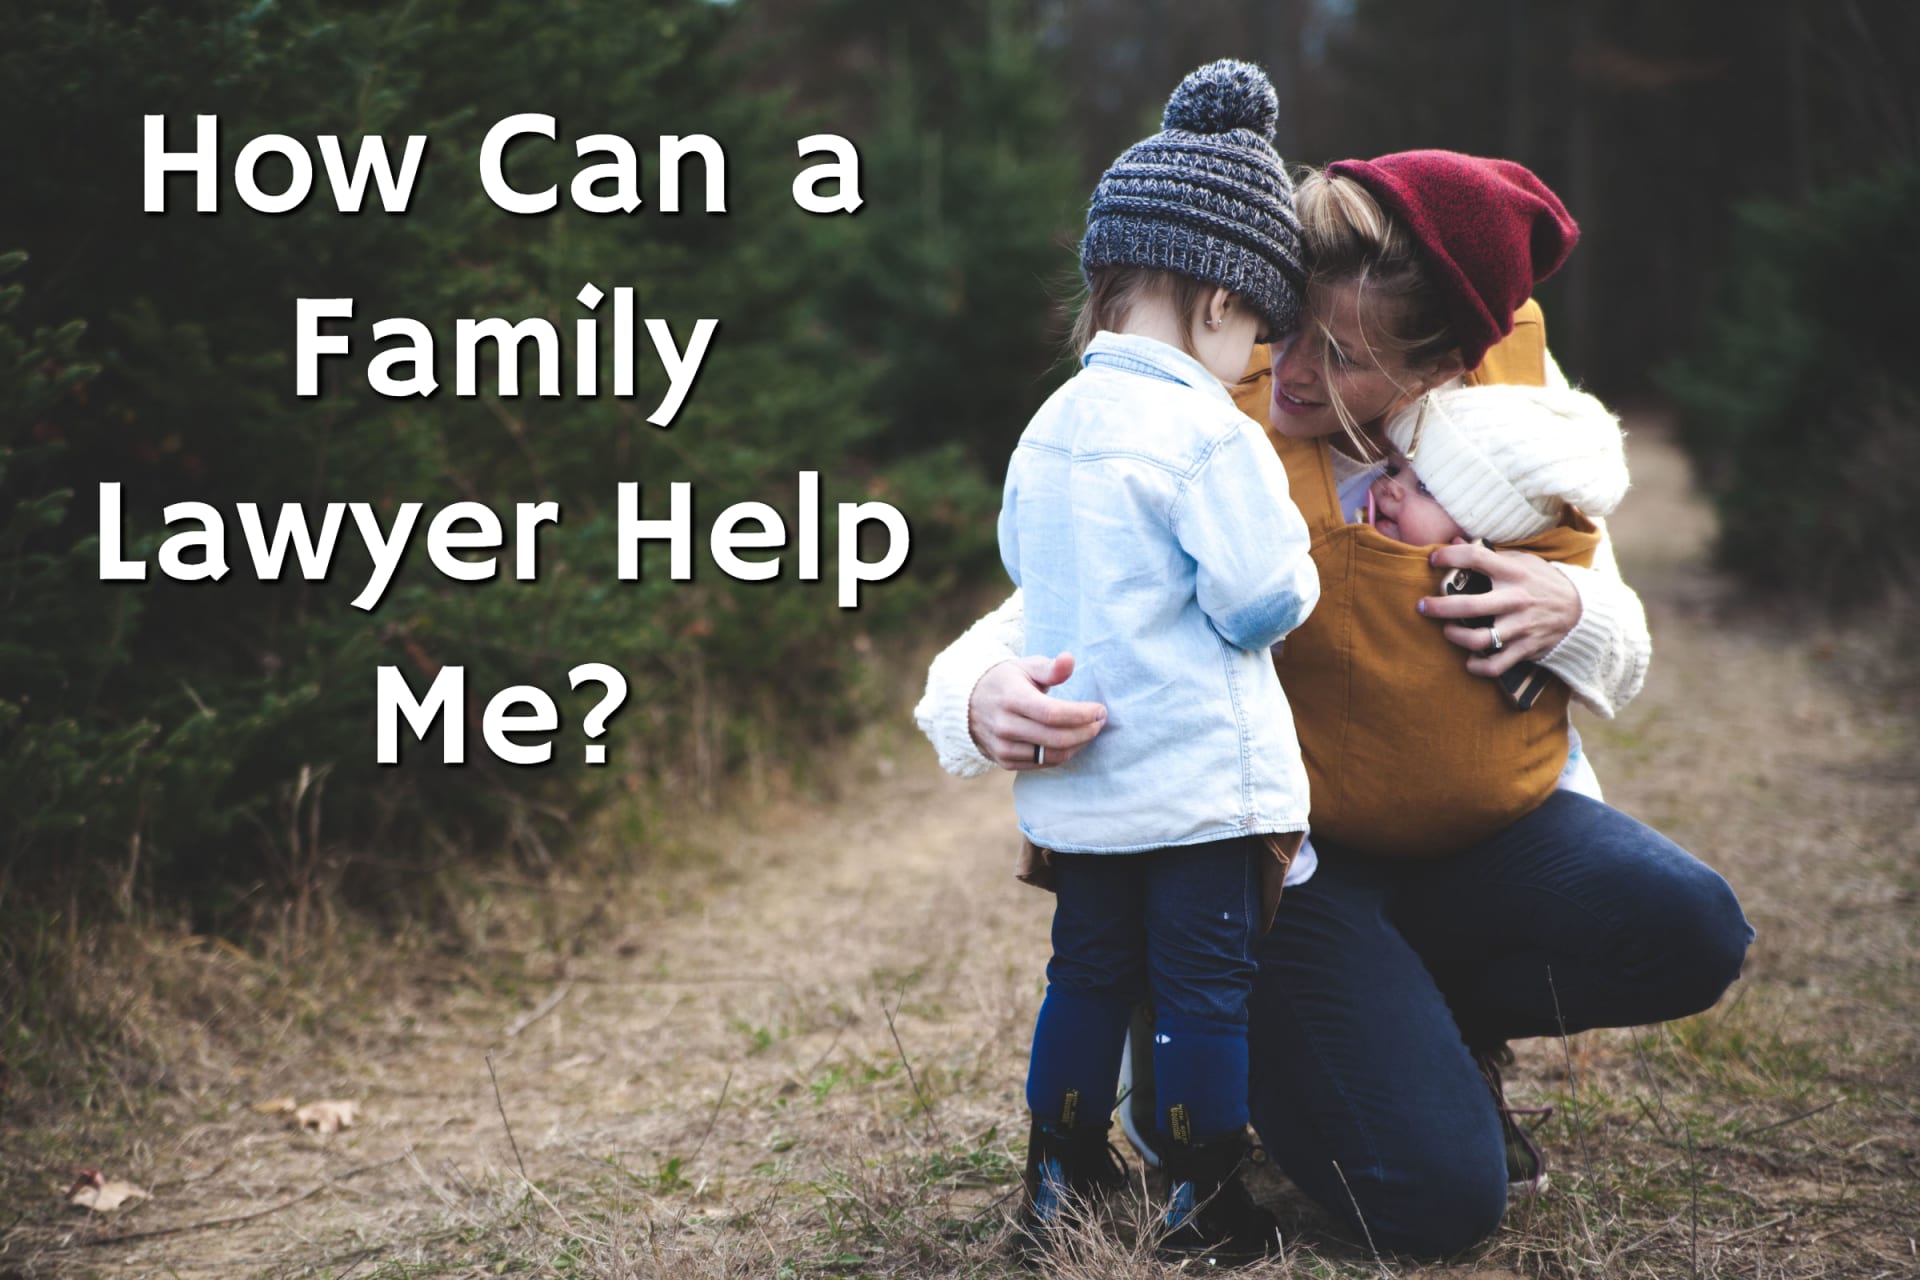 A mother and children in need of a family lawyer